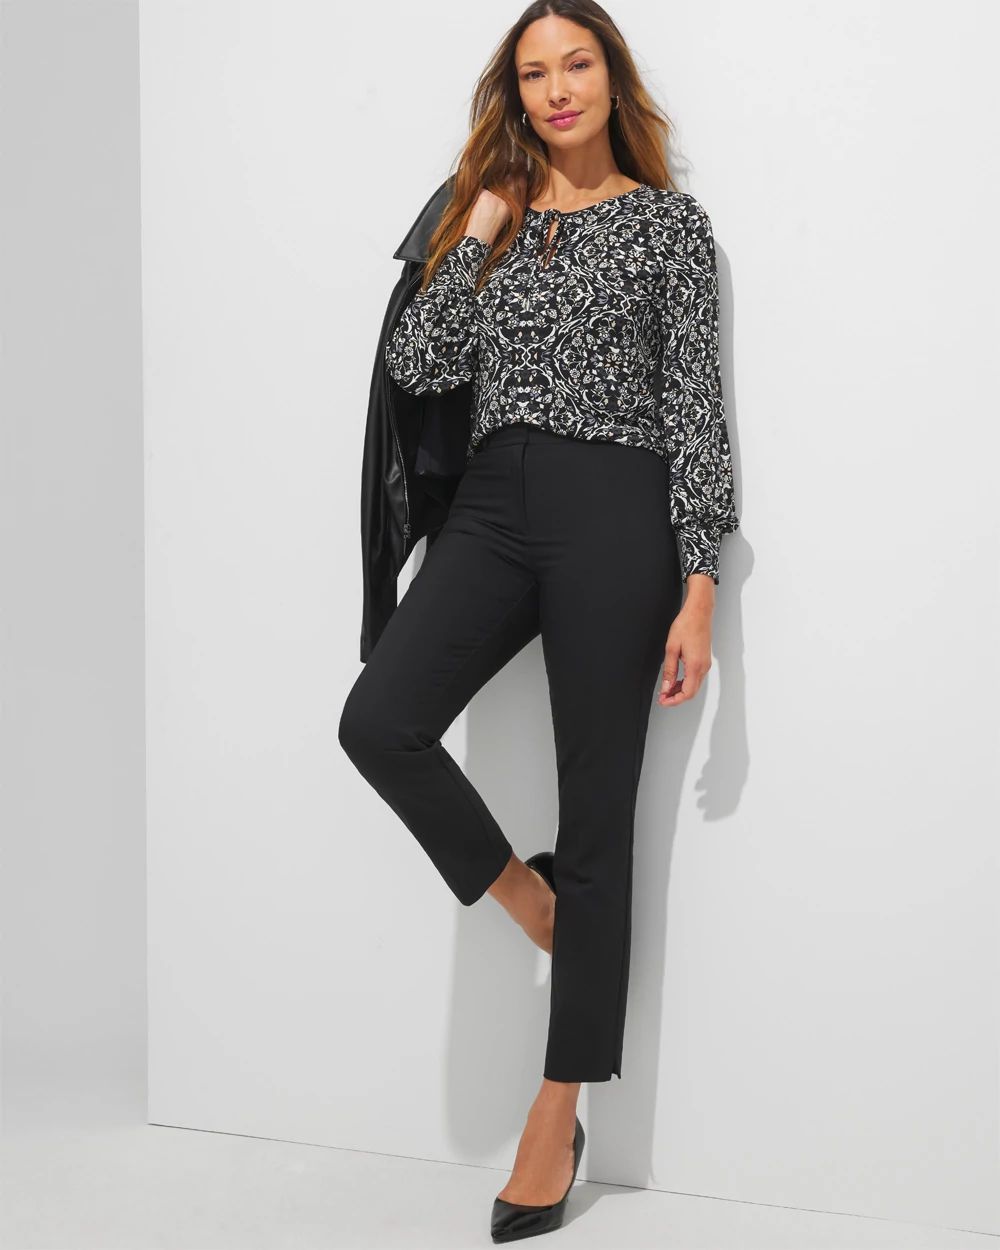 Outlet WHBM Notch Neck Top